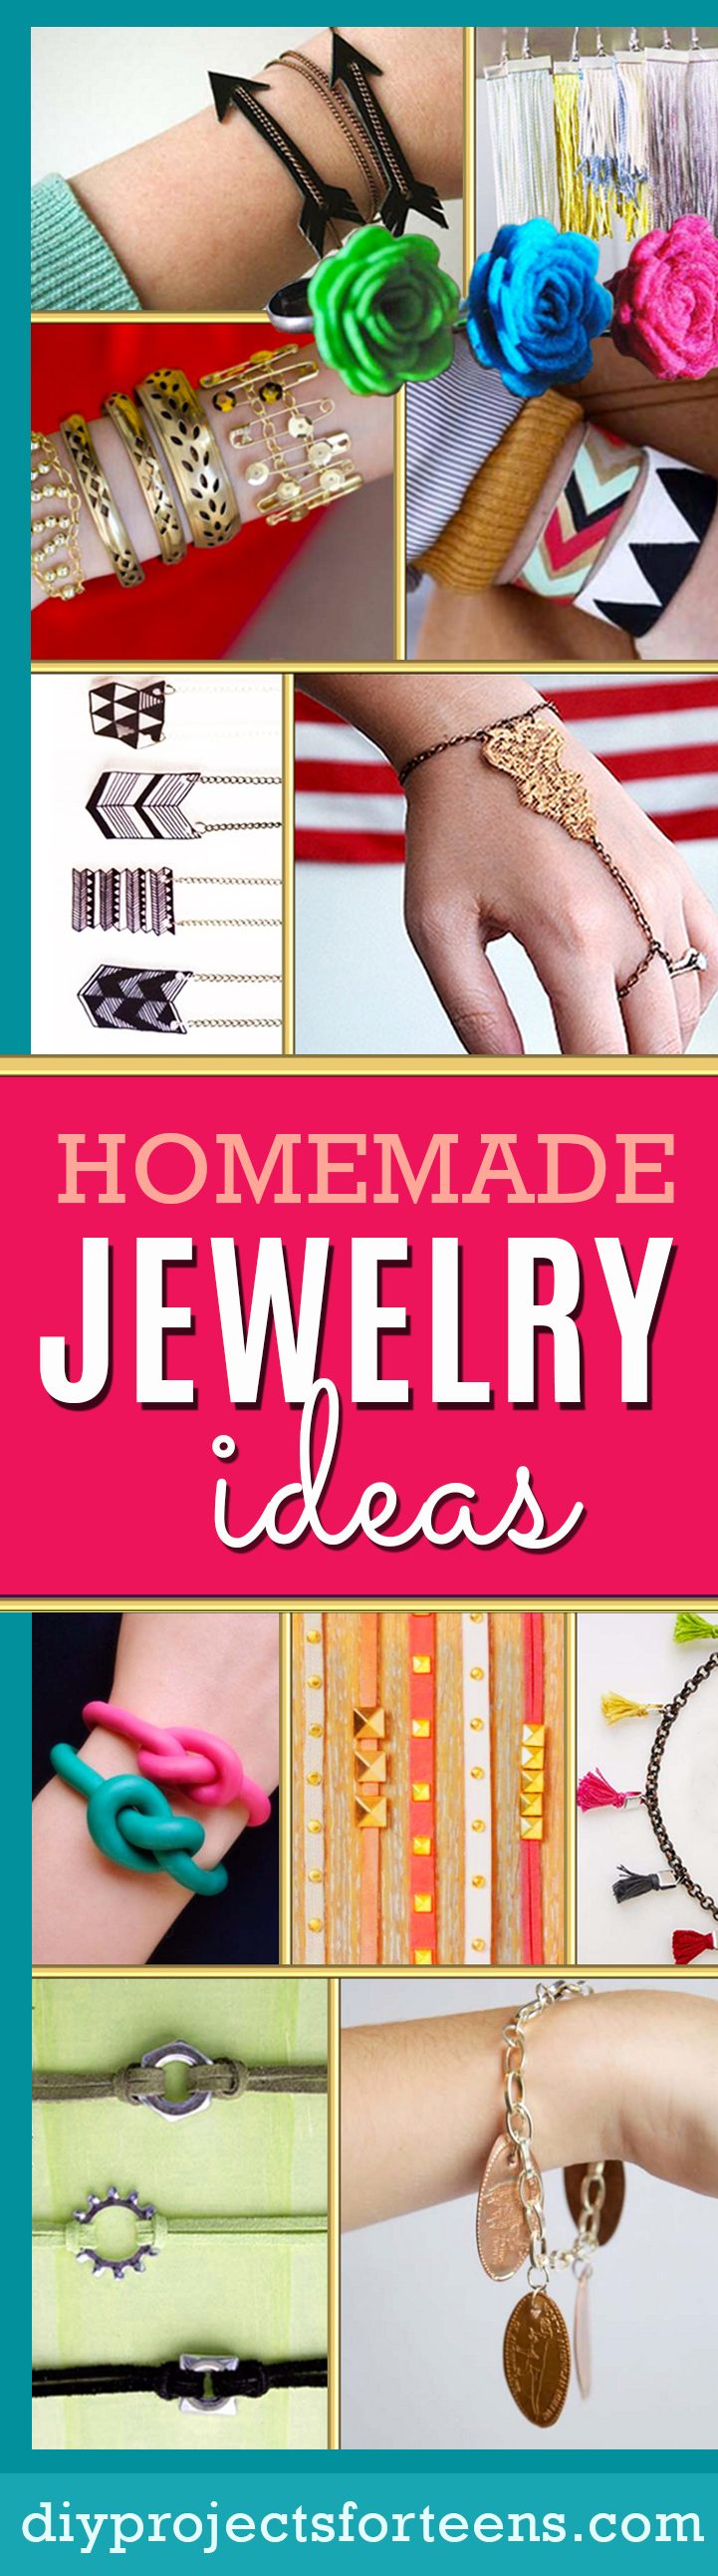 Fun DIY Jewelry Ideas | Cool Homemade Jewelry Tutorials for Adults and Teens | Awesome Bracelets, Necklaces, Earrings and Accessories You Can Make At Home | Safety Pin and Sequin Bracelet 